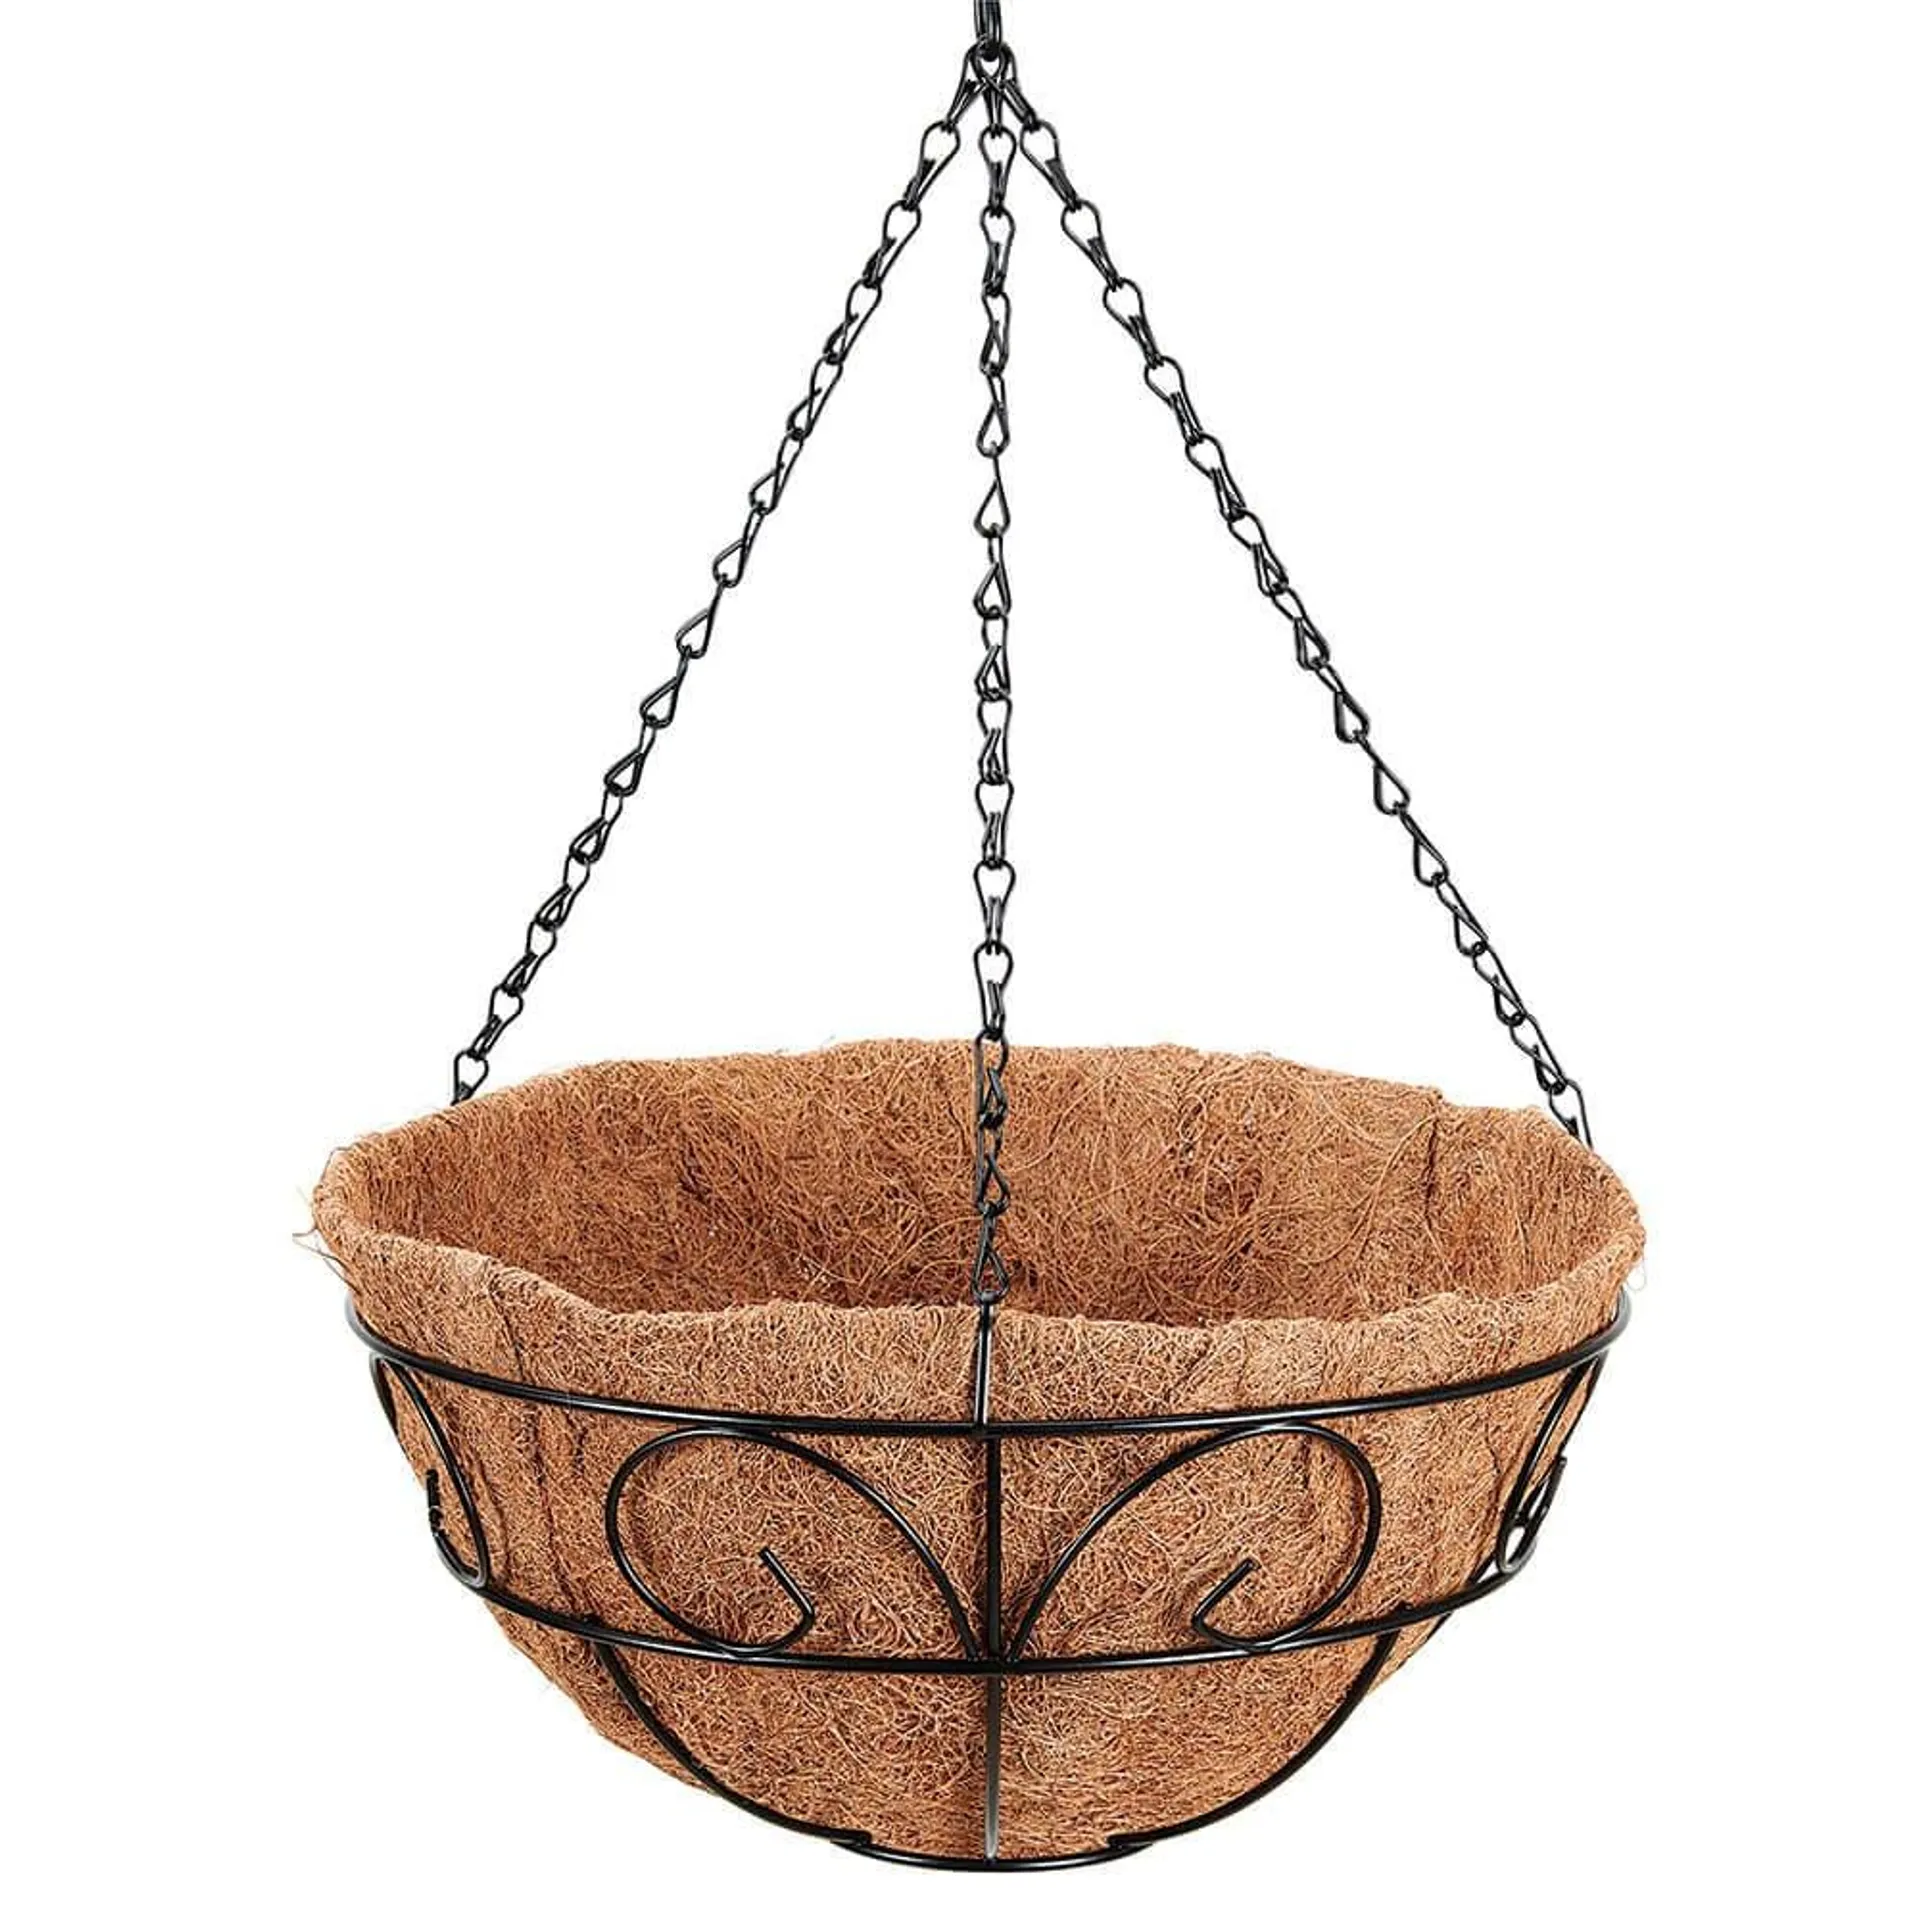 Decorative Scroll Hanging Wire Basket Planter with Coco Liner, 14"